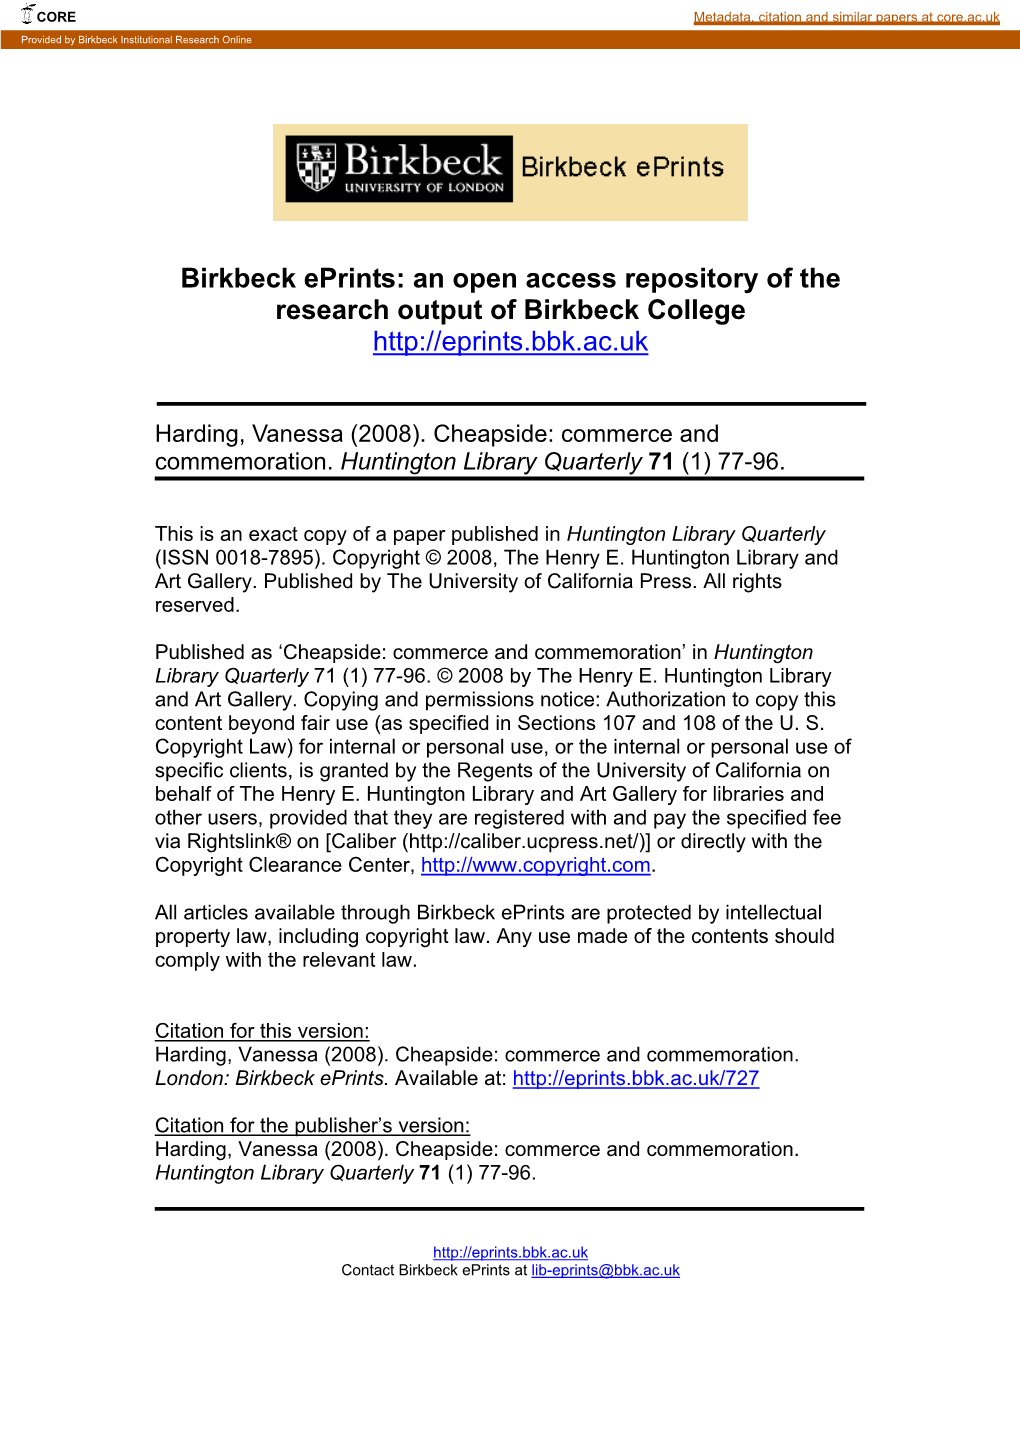 Birkbeck Eprints: an Open Access Repository of the Research Output of Birkbeck College